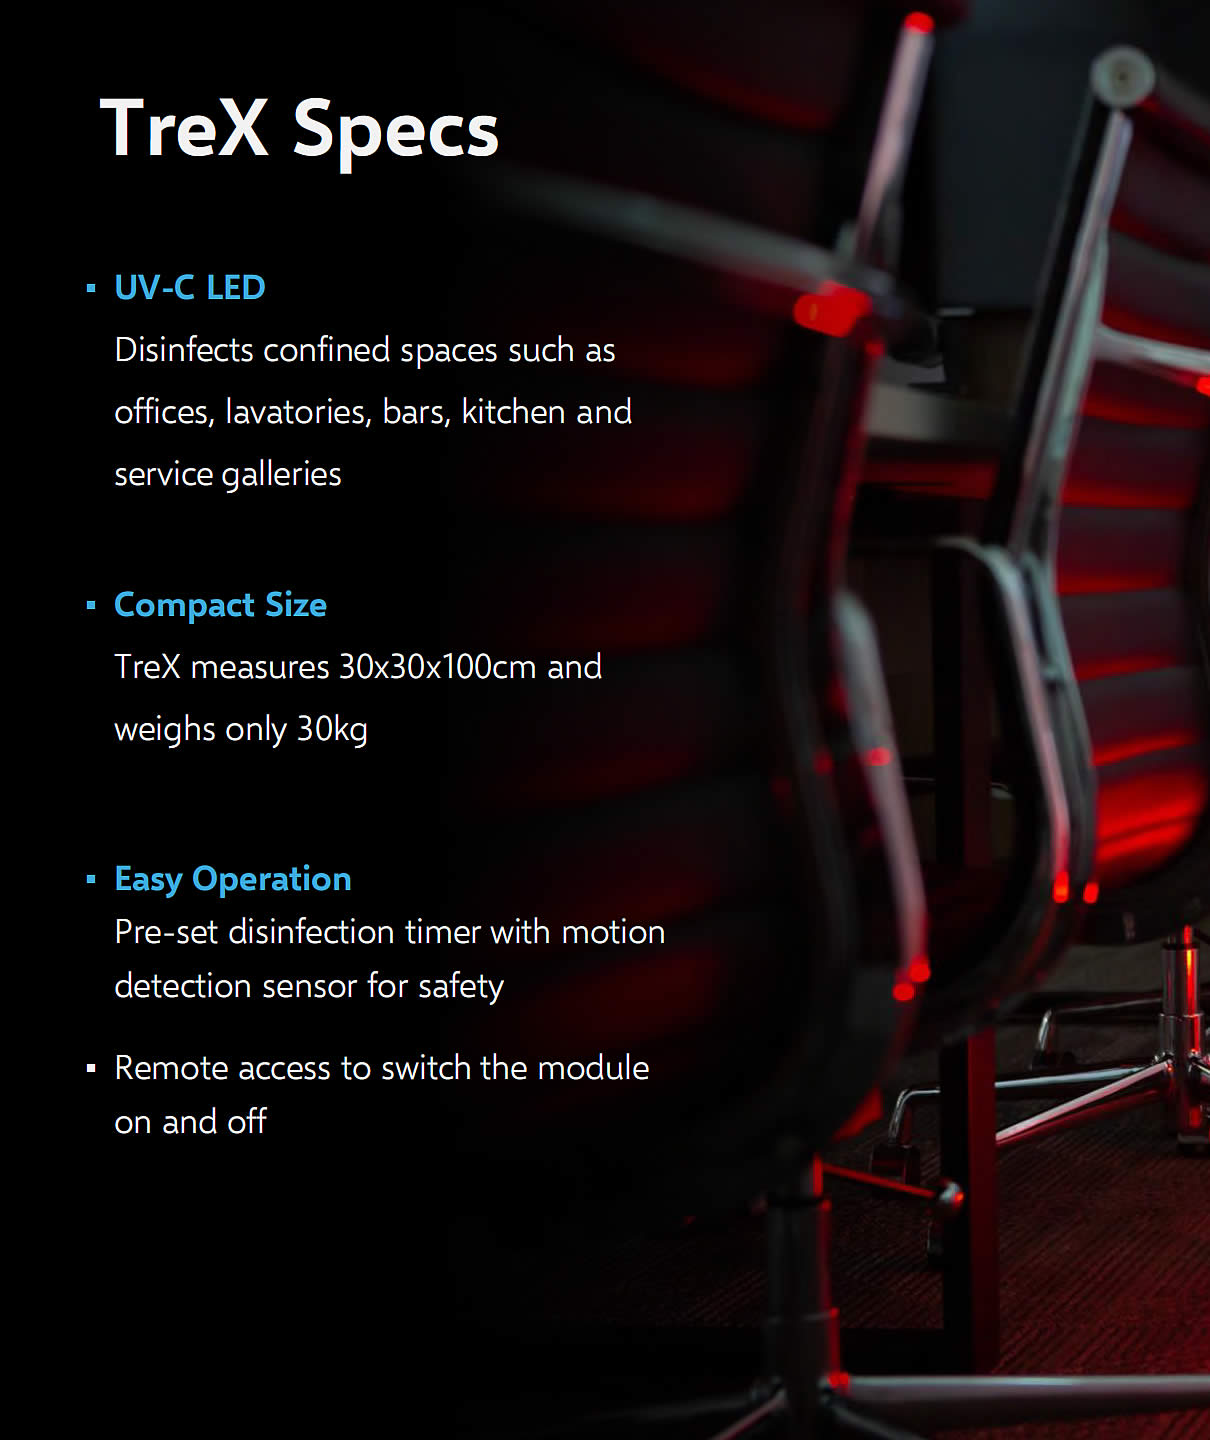 Trex specifications